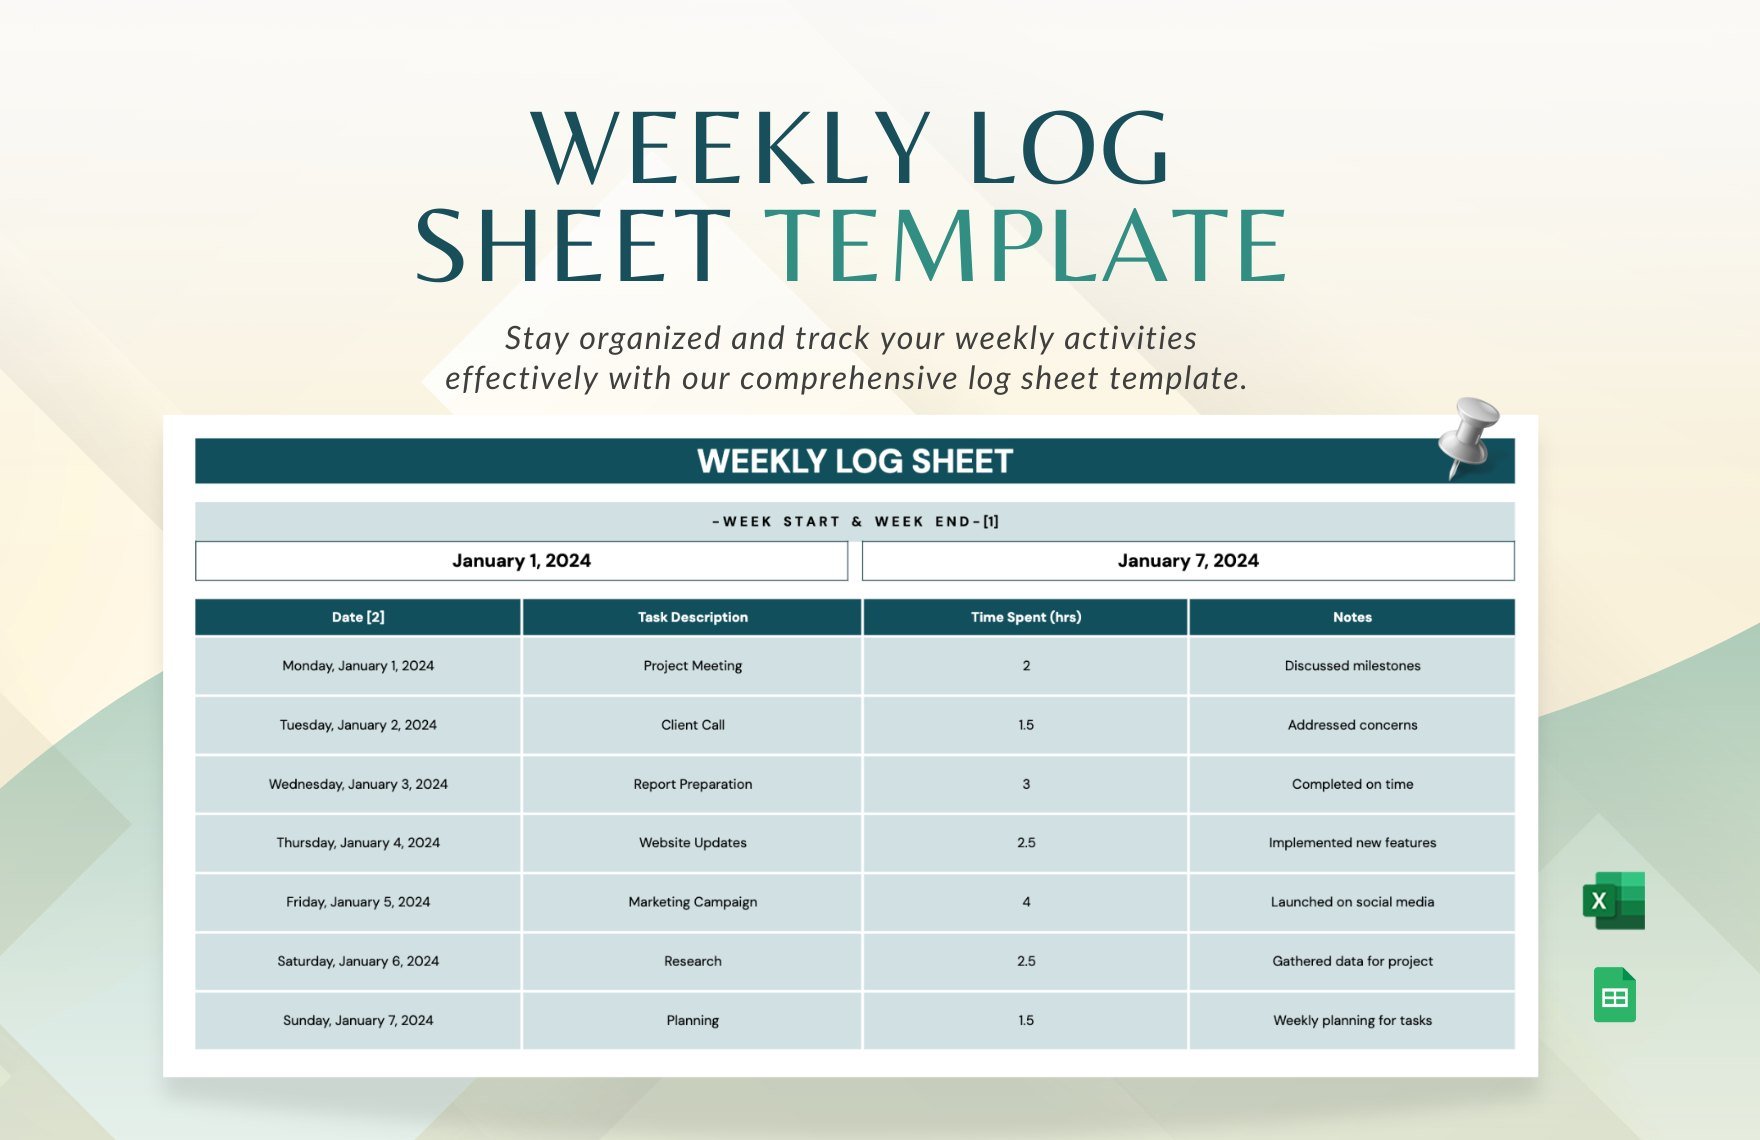 Weekly Log Sheet Template in Excel, Google Sheets